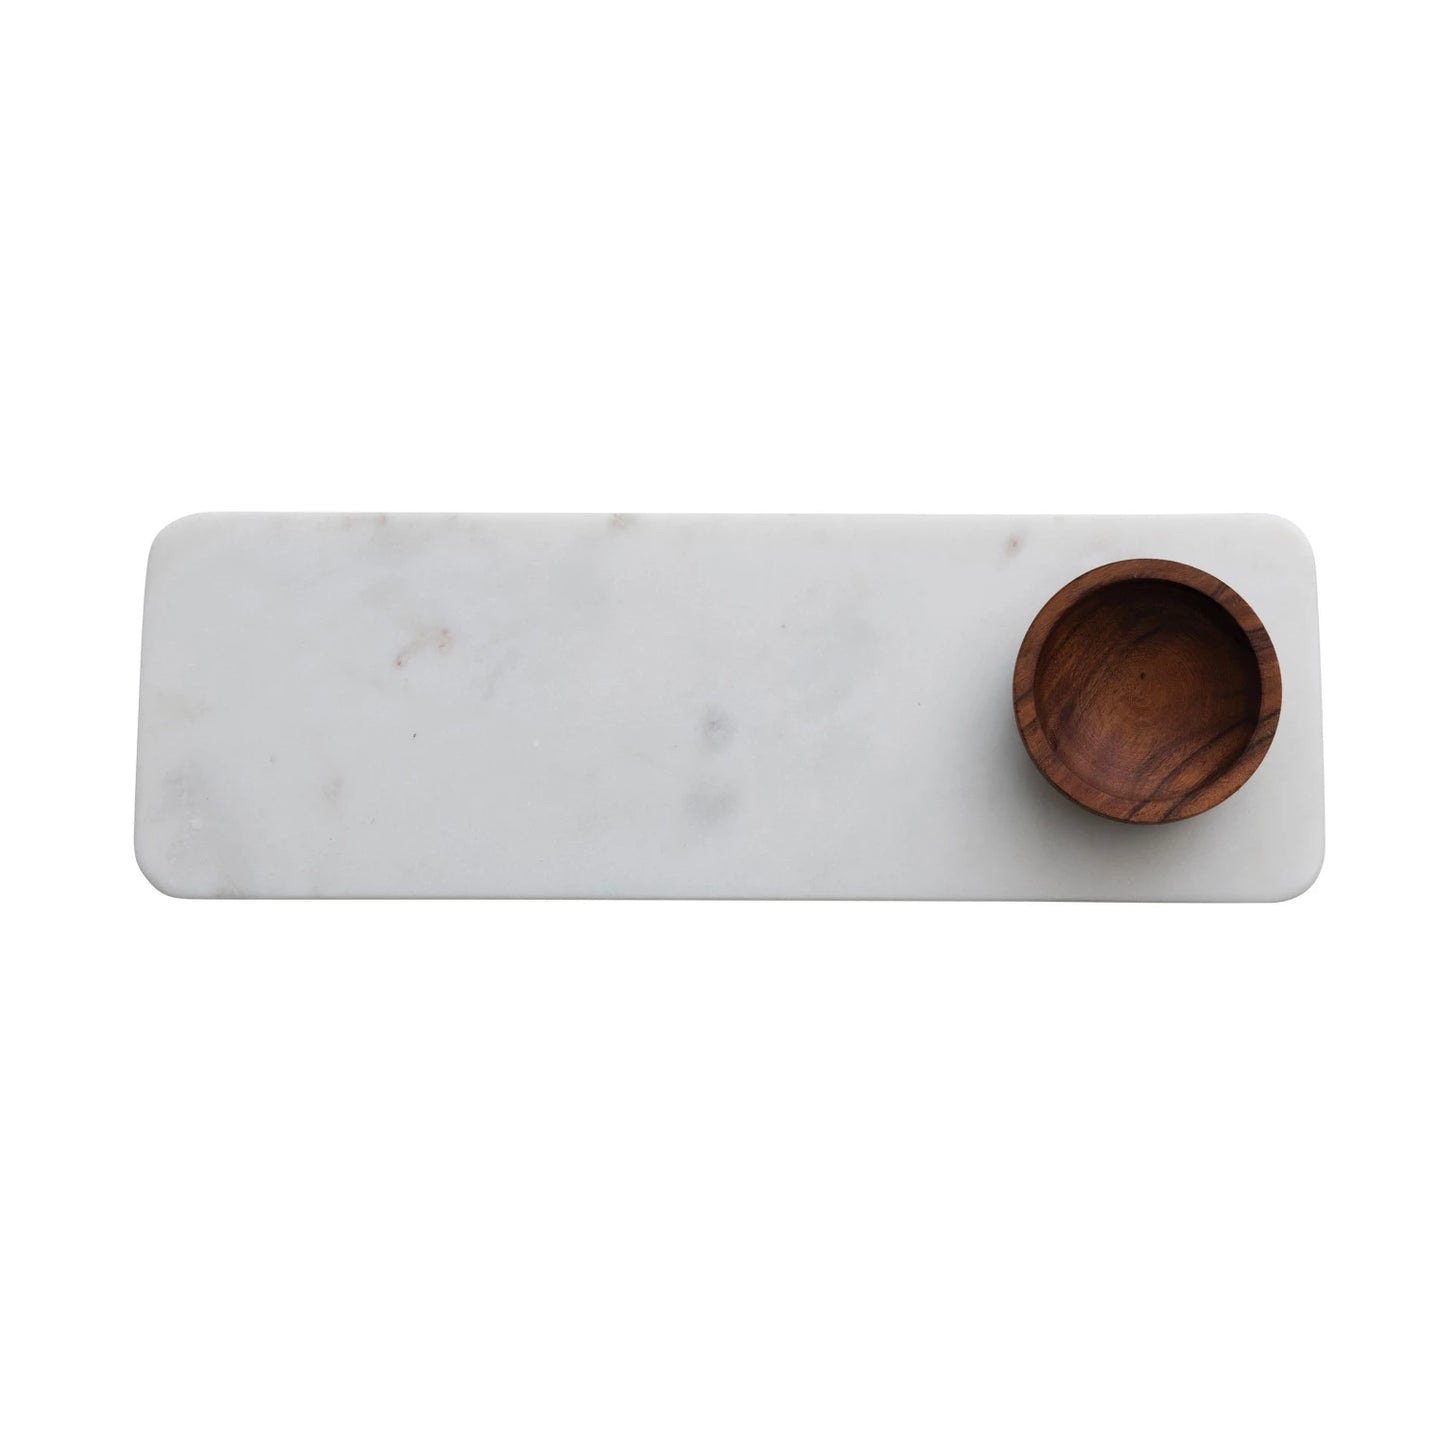 MARBLE SERVING BOARD WITH ACACIA WOOD BOWL